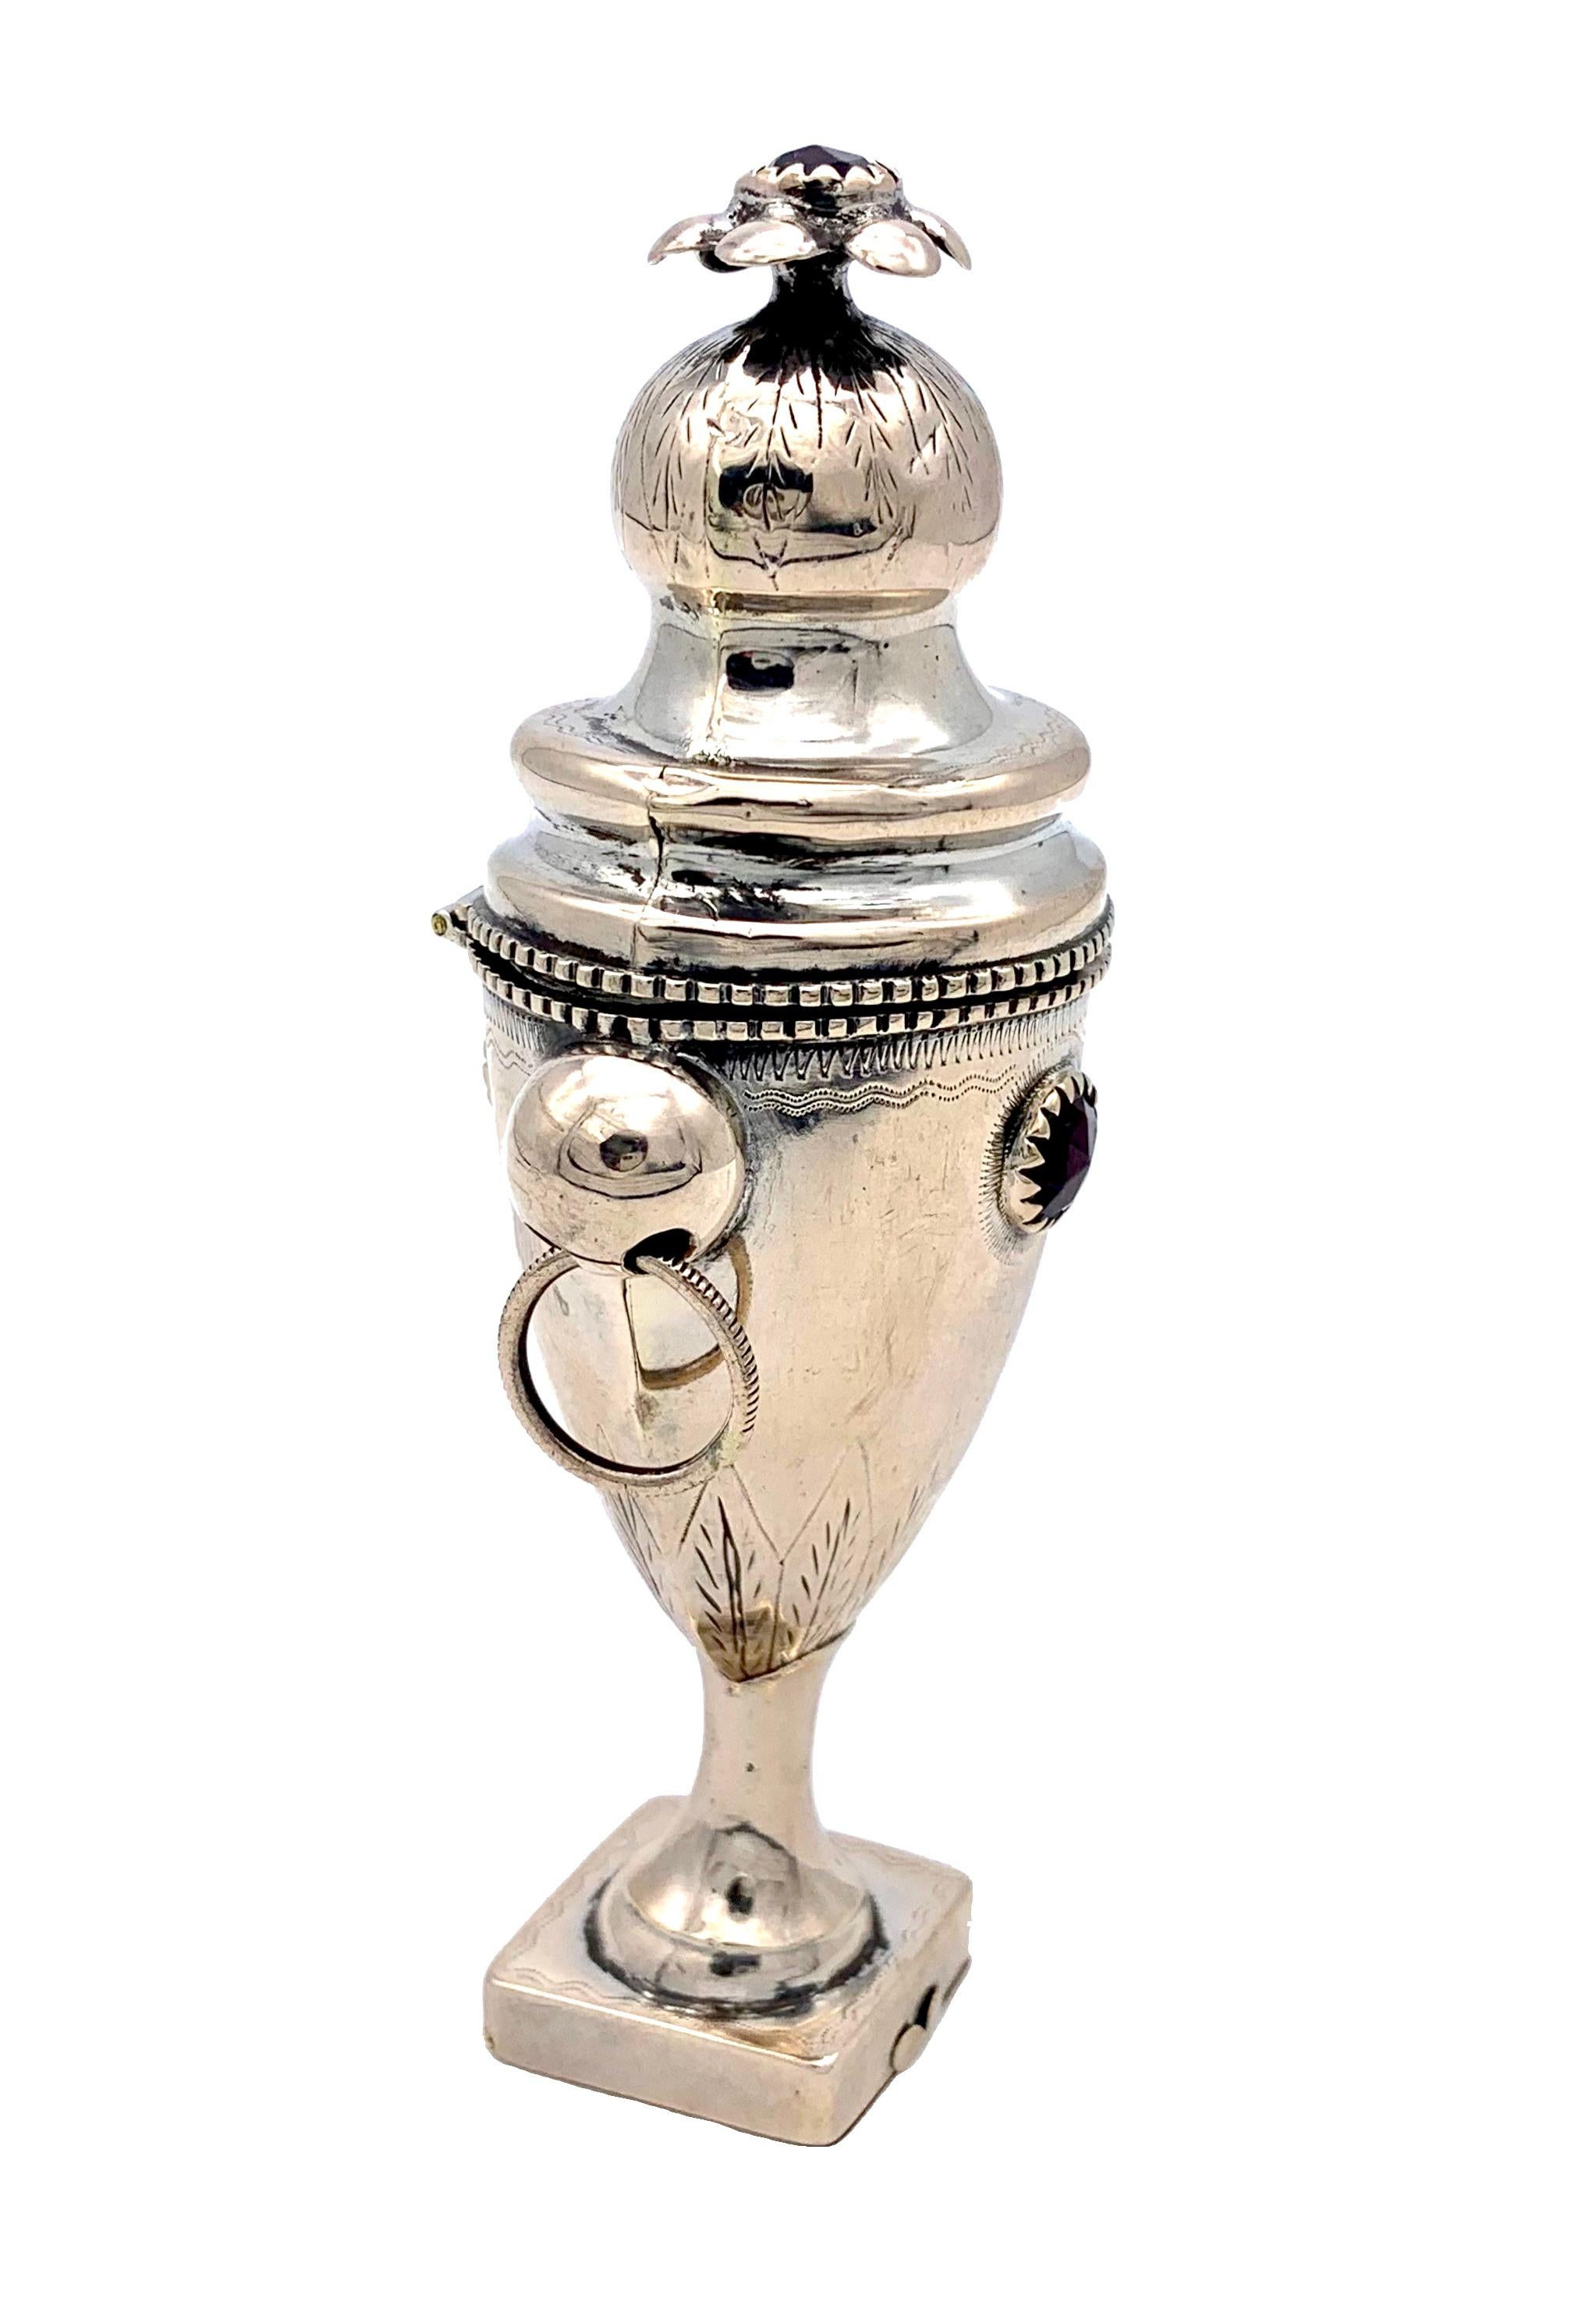 The influence of the Empire for objects in classical antique manner is still felt in this elegant silver spice box designed in the shape of an amphora on a pedestal with two handles.  The handles are decorated with a grooved pattern.. The dome